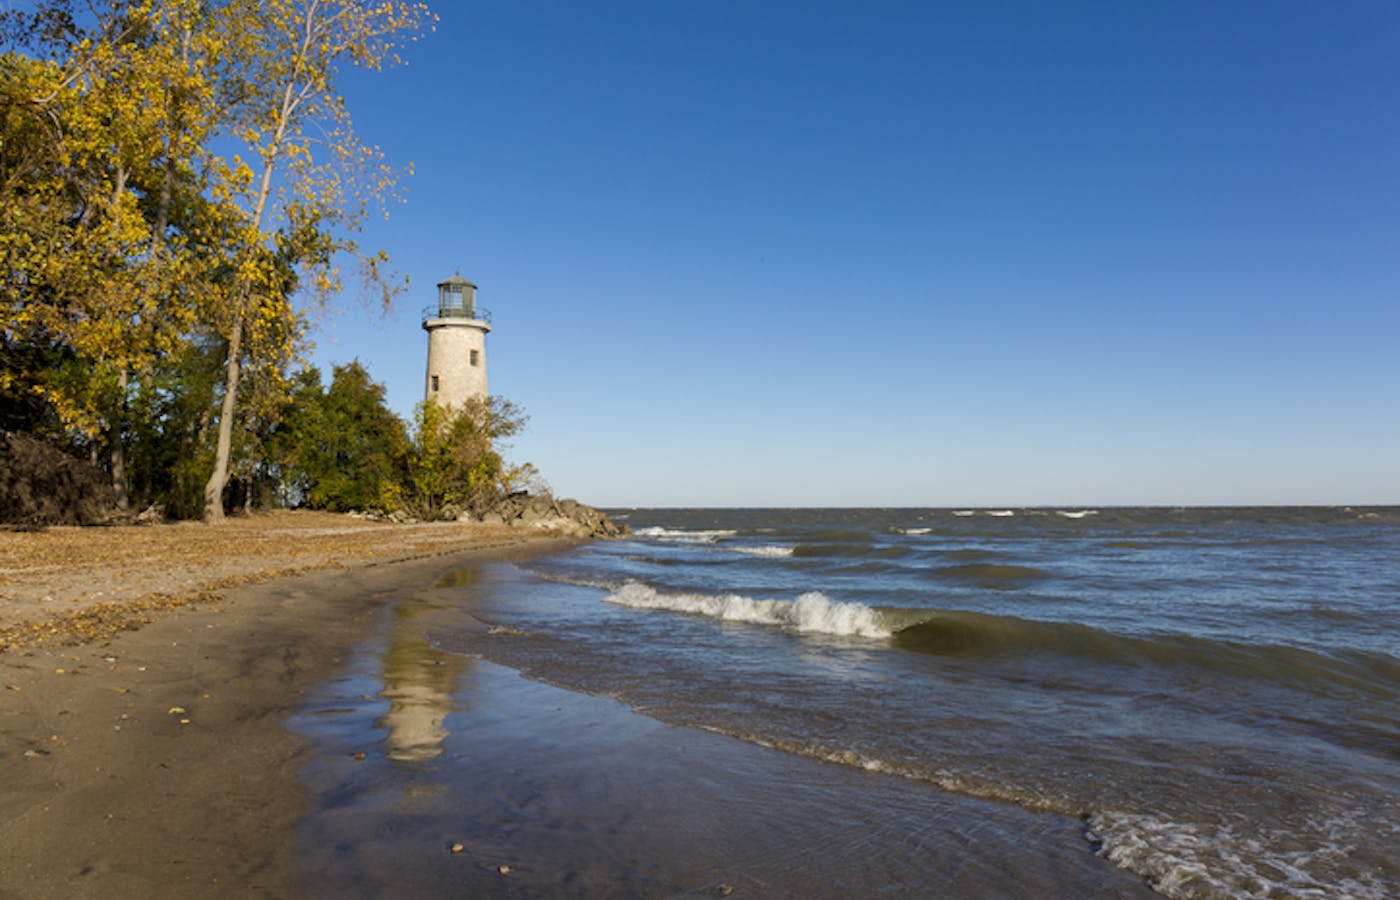 Take 5: Lighthouses of the North Shore